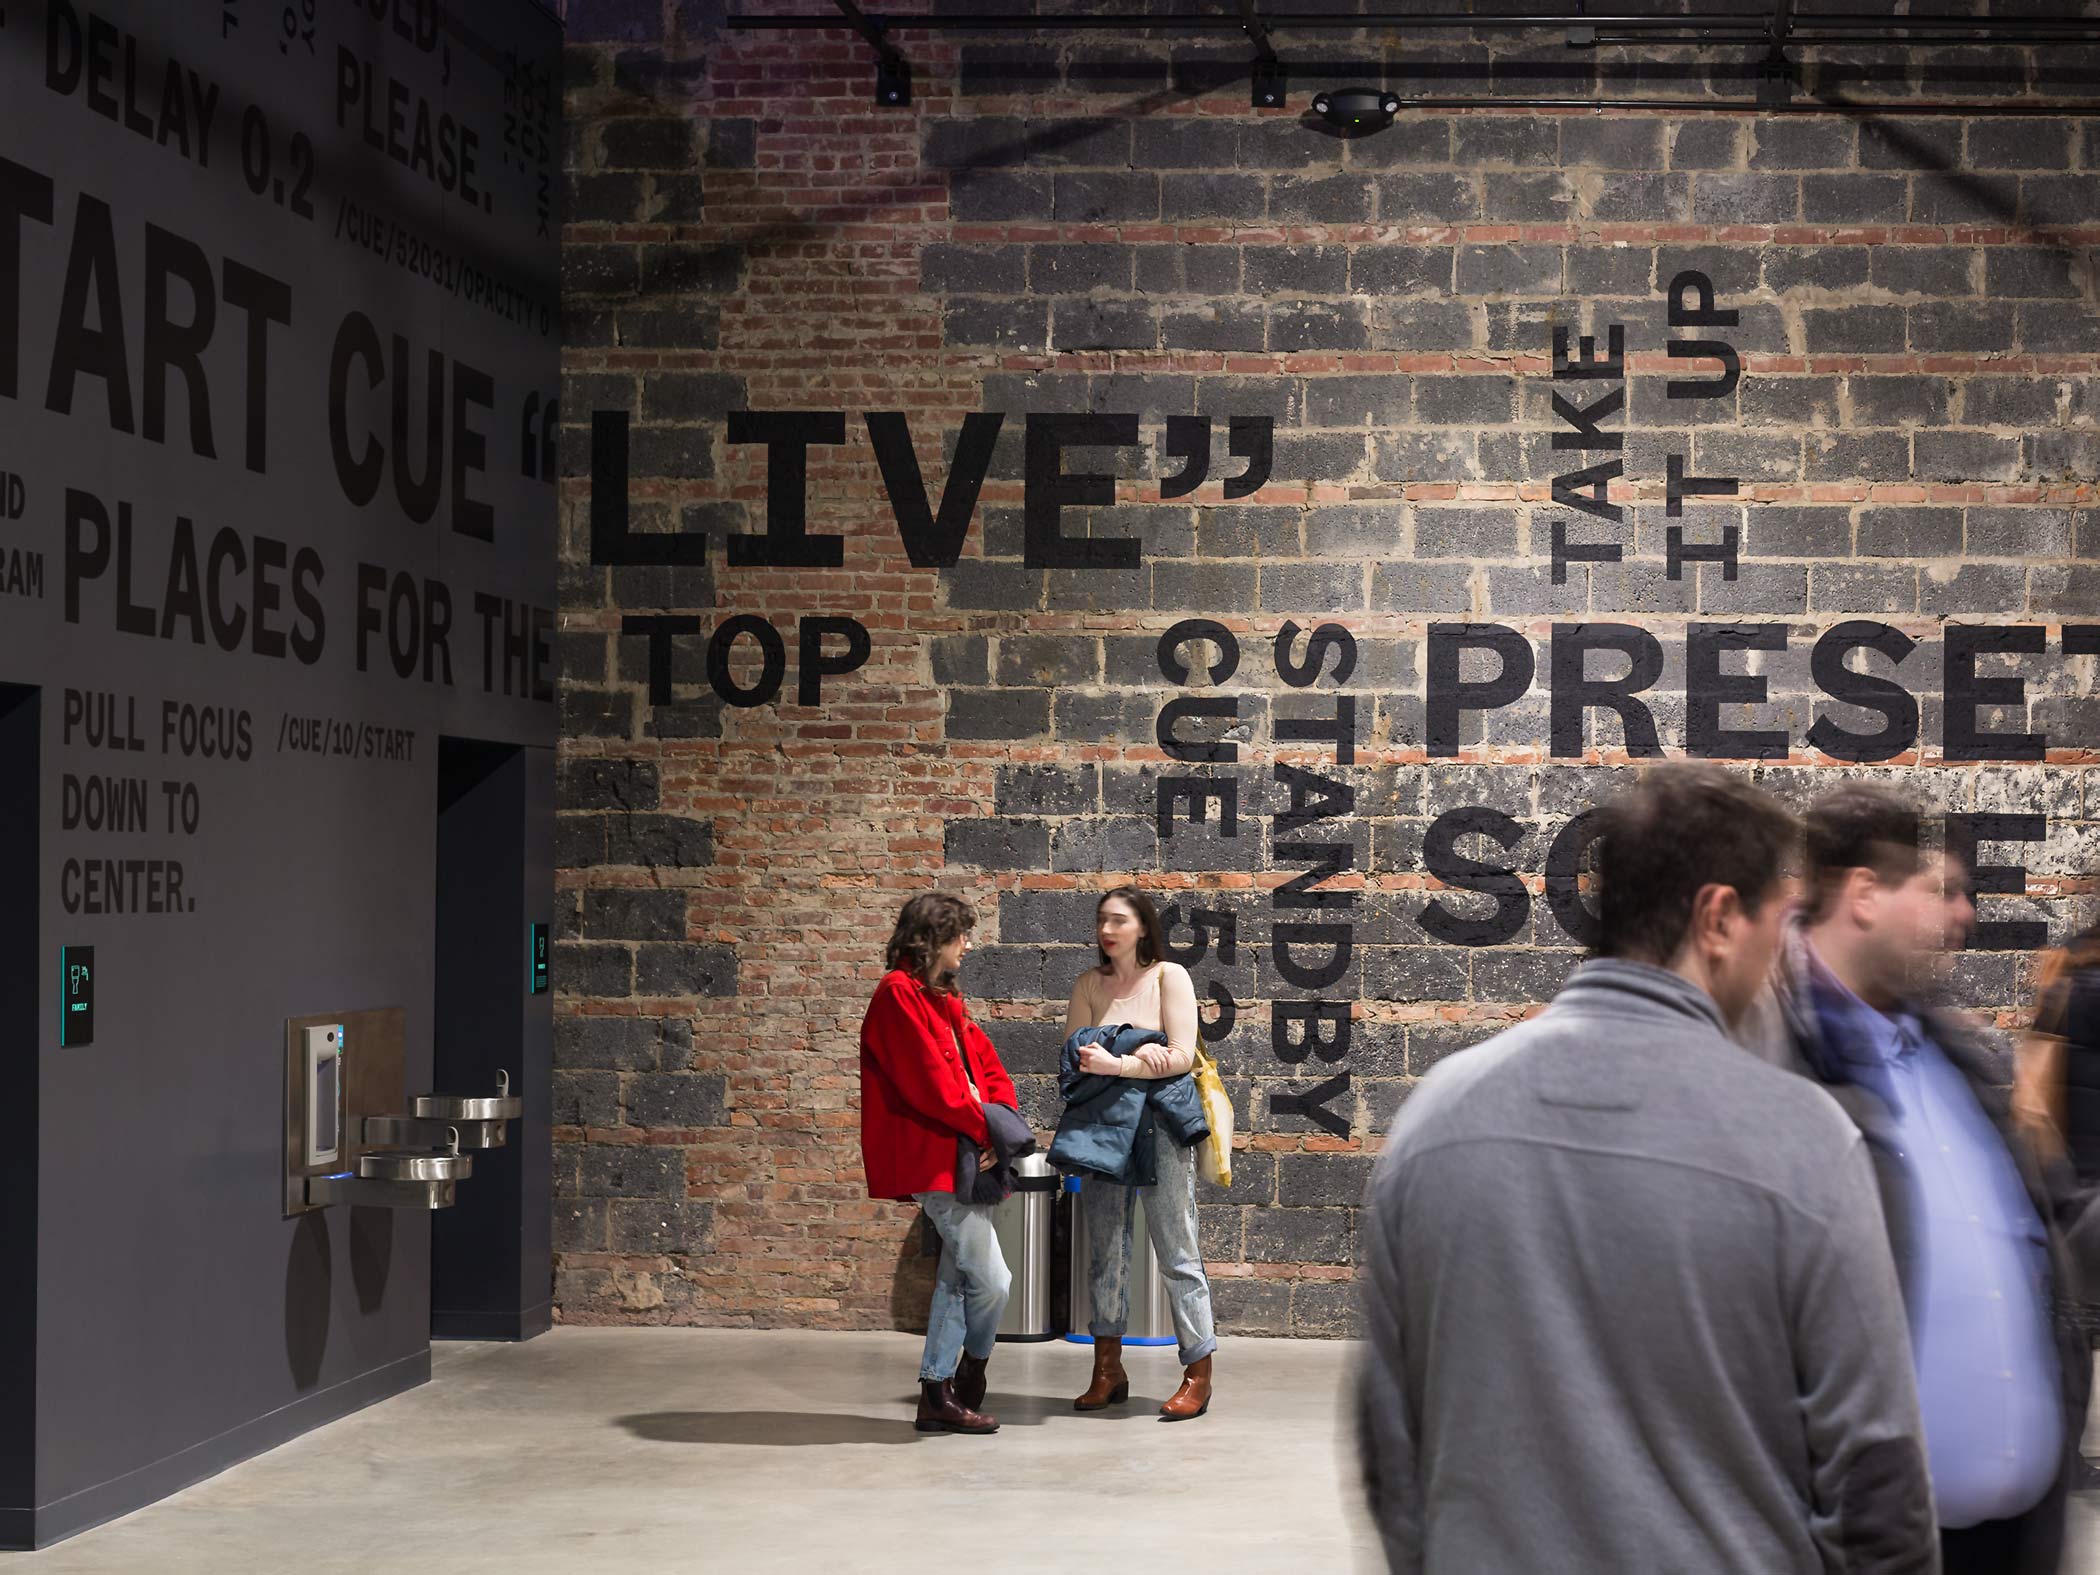 Typographic mural lettering and kinetic poetry wrap around the lobby of The Voxel Theater